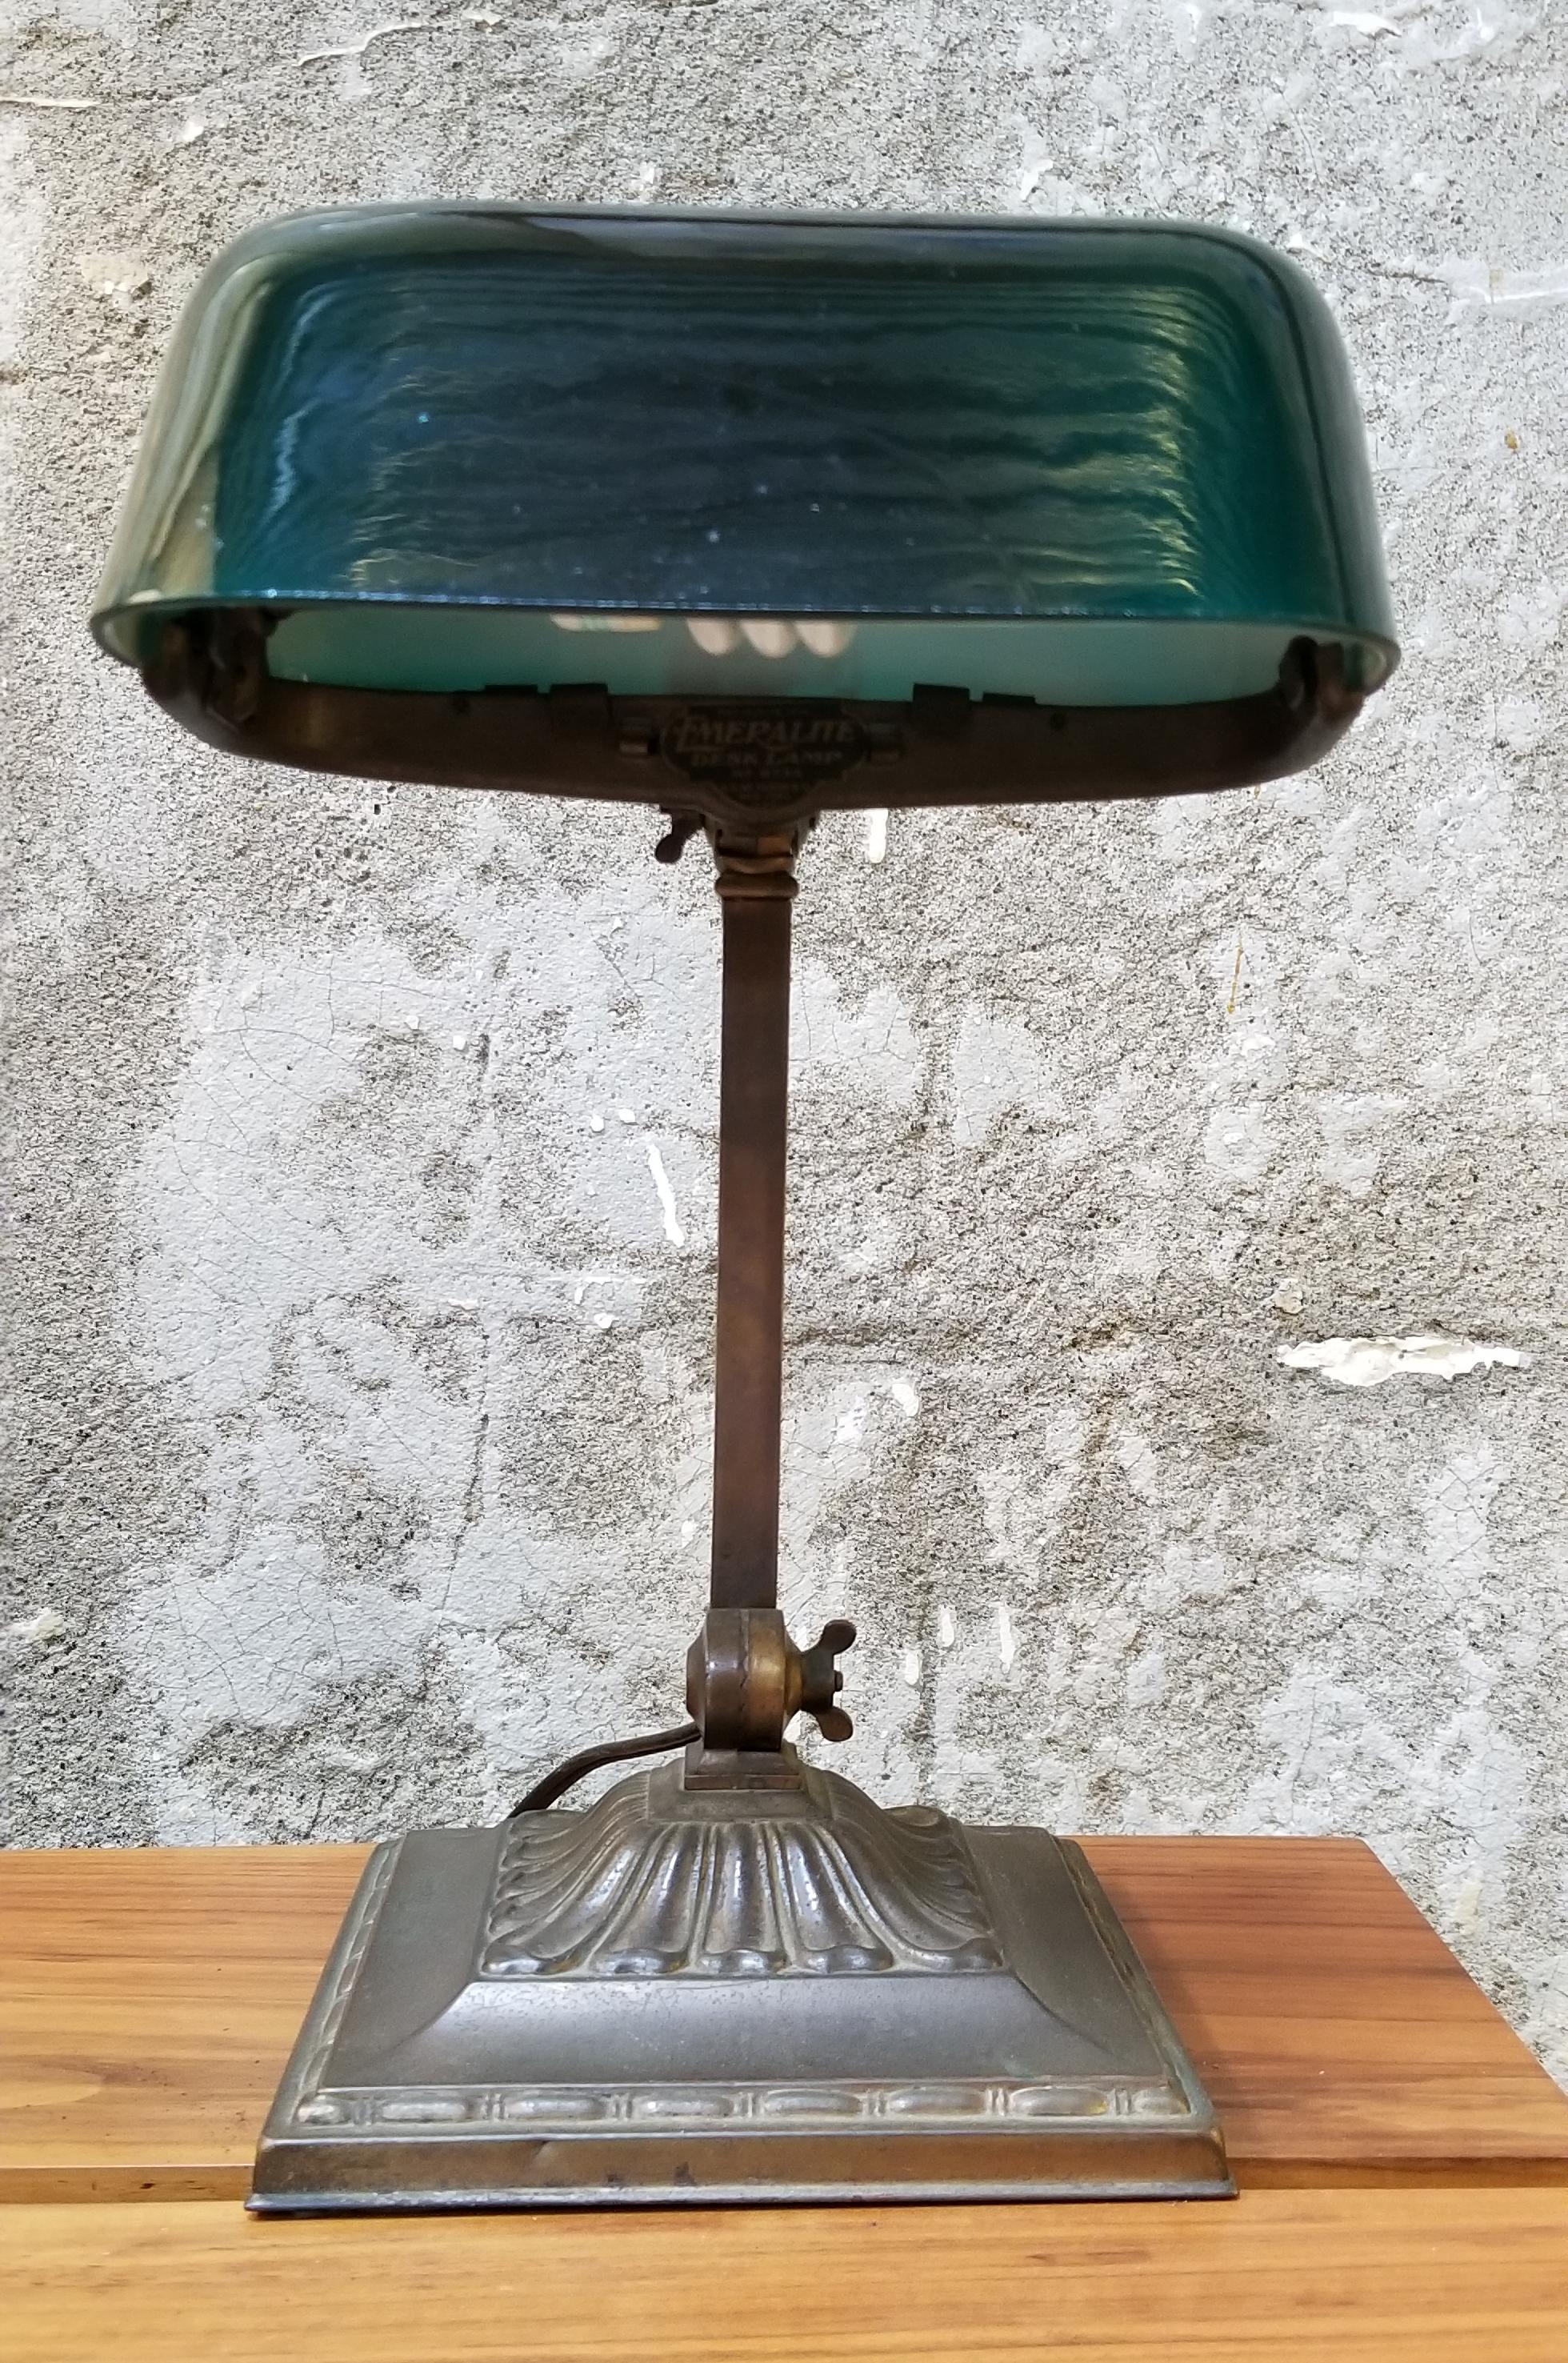 Period bankers / students / library table lamp by Emeralite Lamp Company. Circa. 1920. Beautiful emerald green cased glass shade. Two adjustable lighting positions. Original patina to base. Retains Emeralite label.

EMERALITE
Bellova and